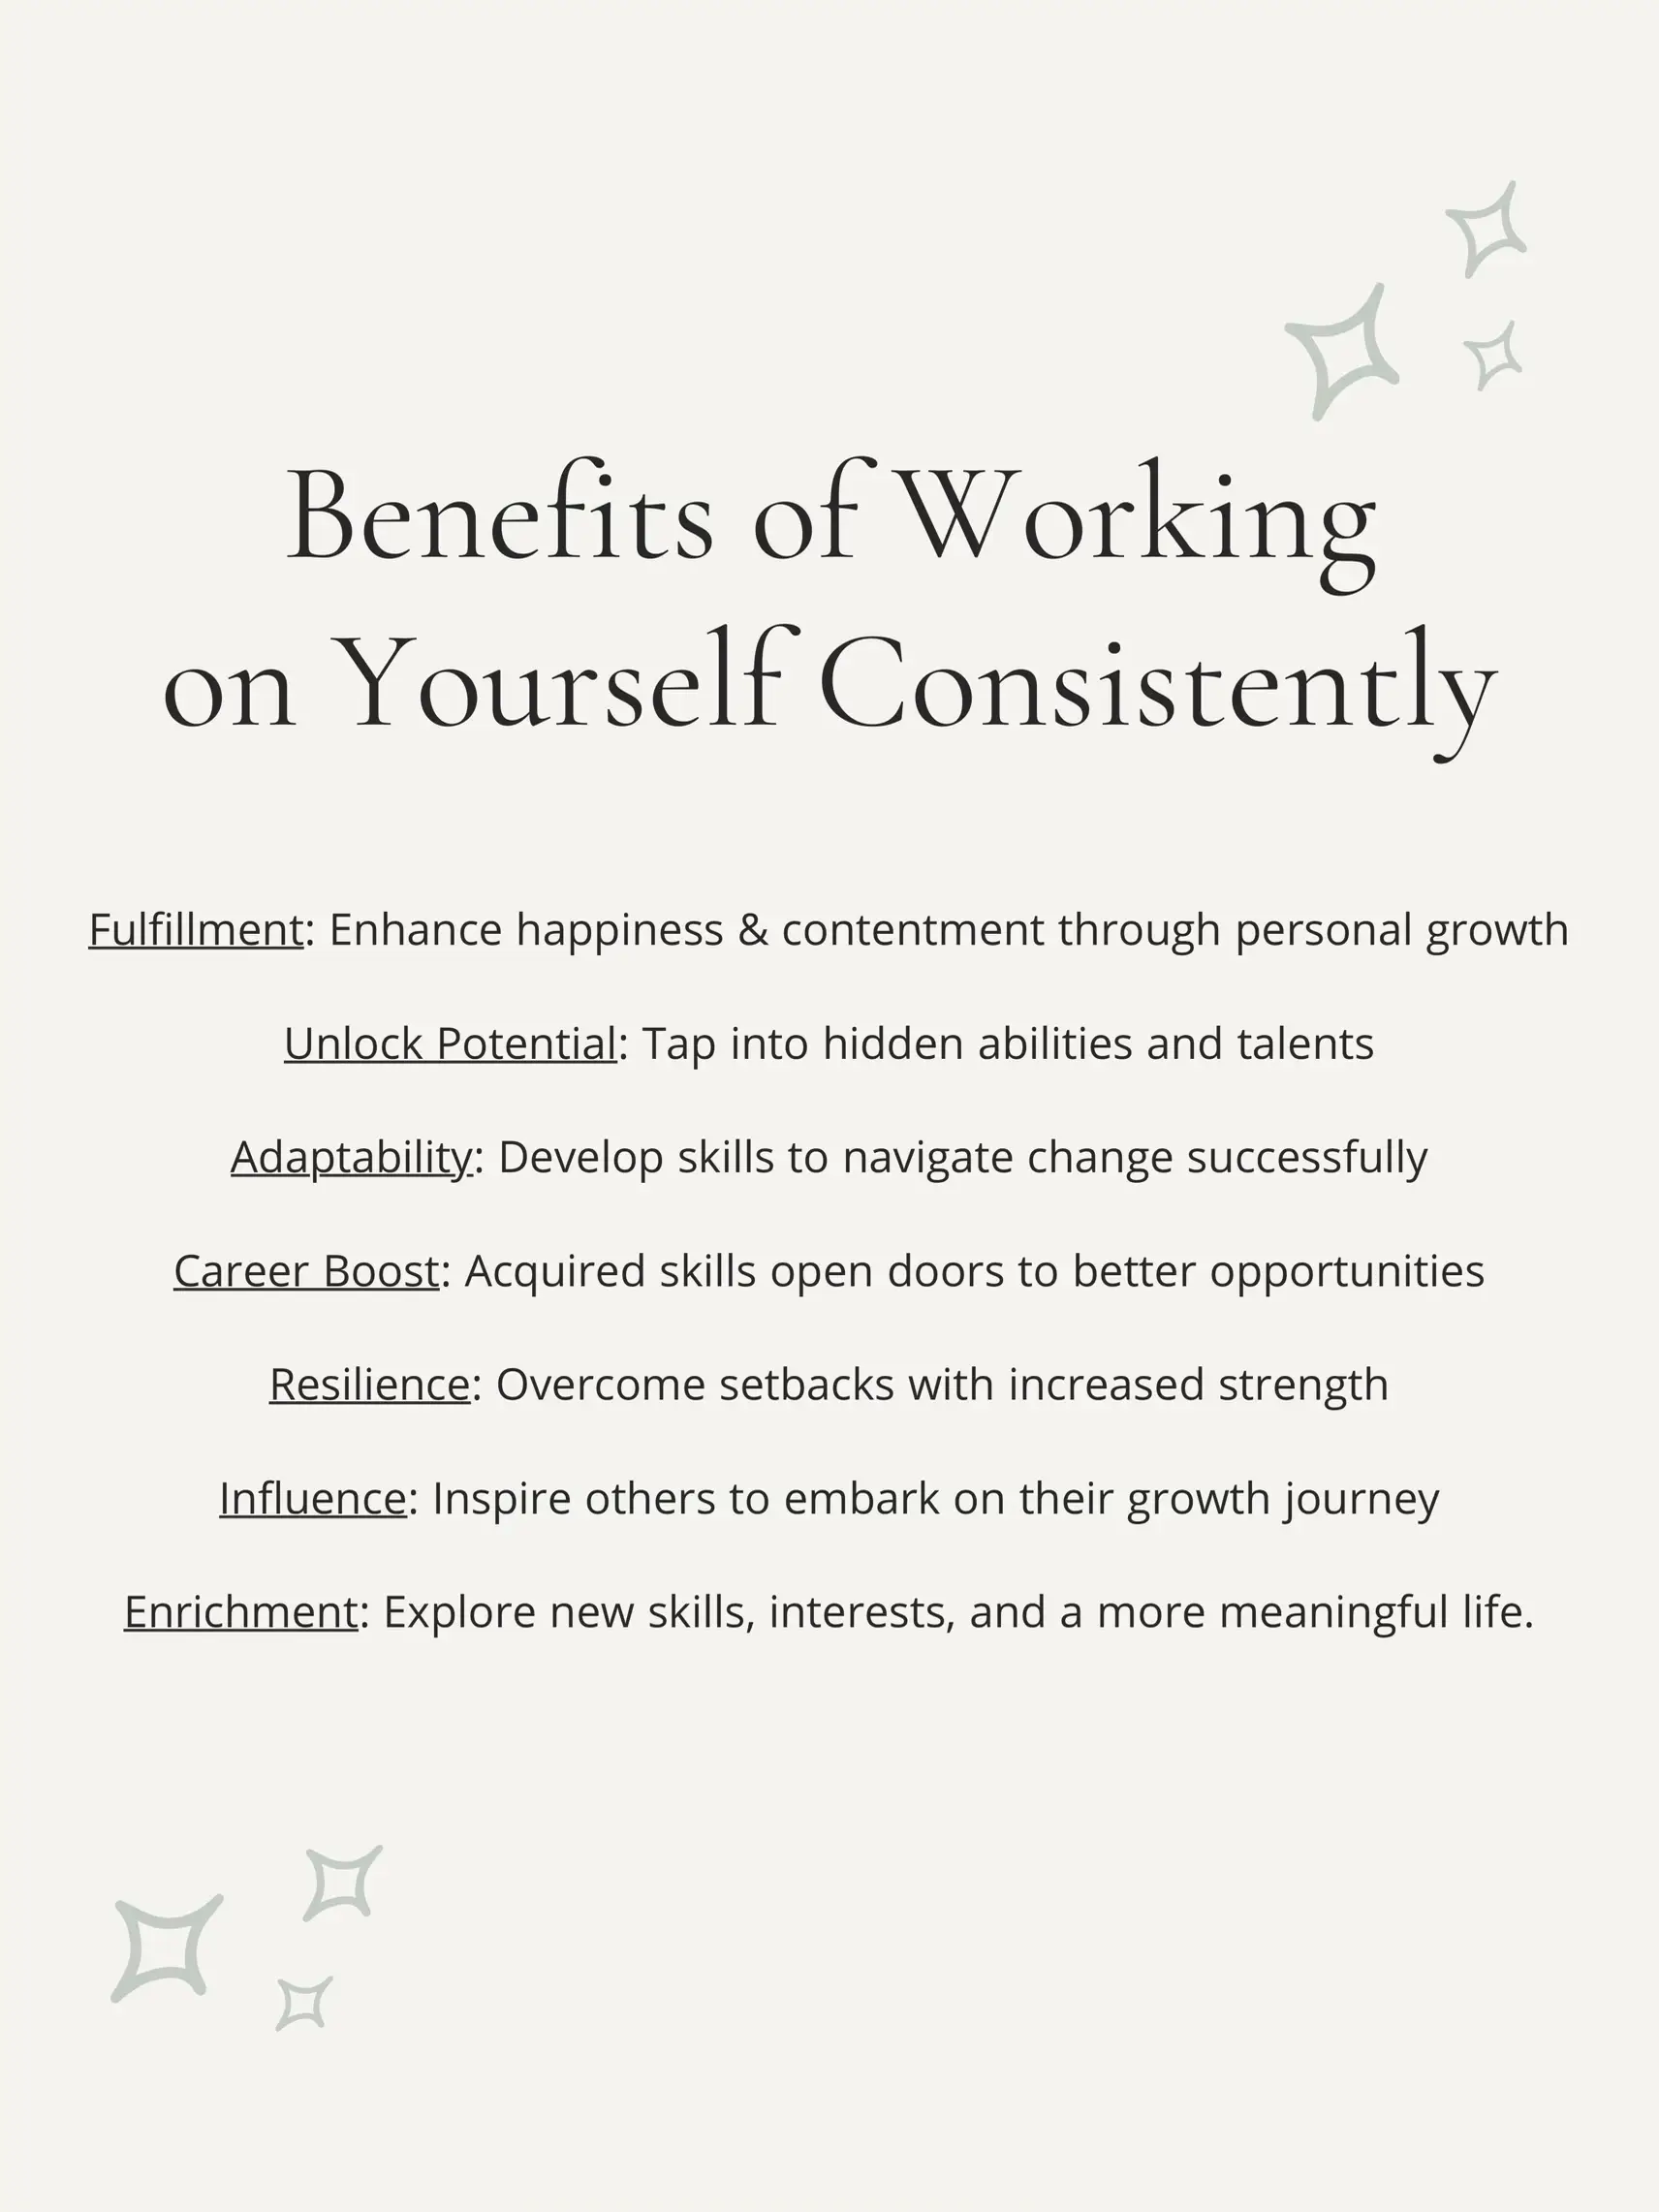  A list of benefits of working on oneself consistently.